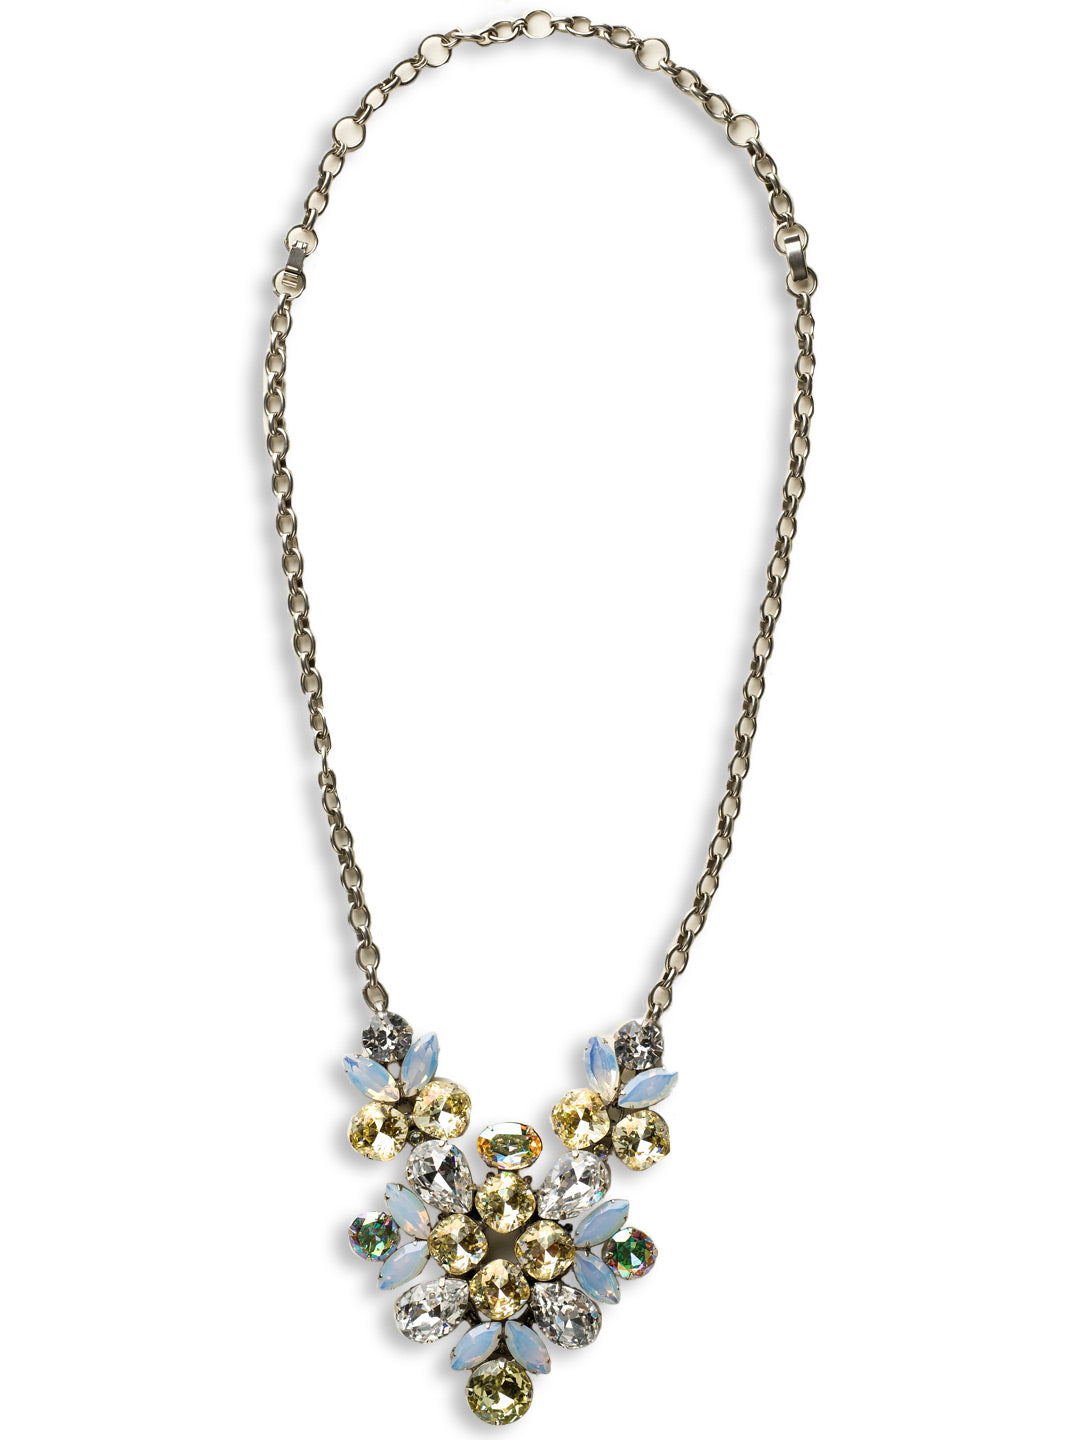 Crystal Lotus Convertible Necklace - NCR1ASLZ - <p>To make a long story short, this necklace is convertible! Layer it with long strands or stack it with other statements! Long or short, the interesting array of crystals works to light up the night. From Sorrelli's Lemon Zest collection in our Antique Silver-tone finish.</p>